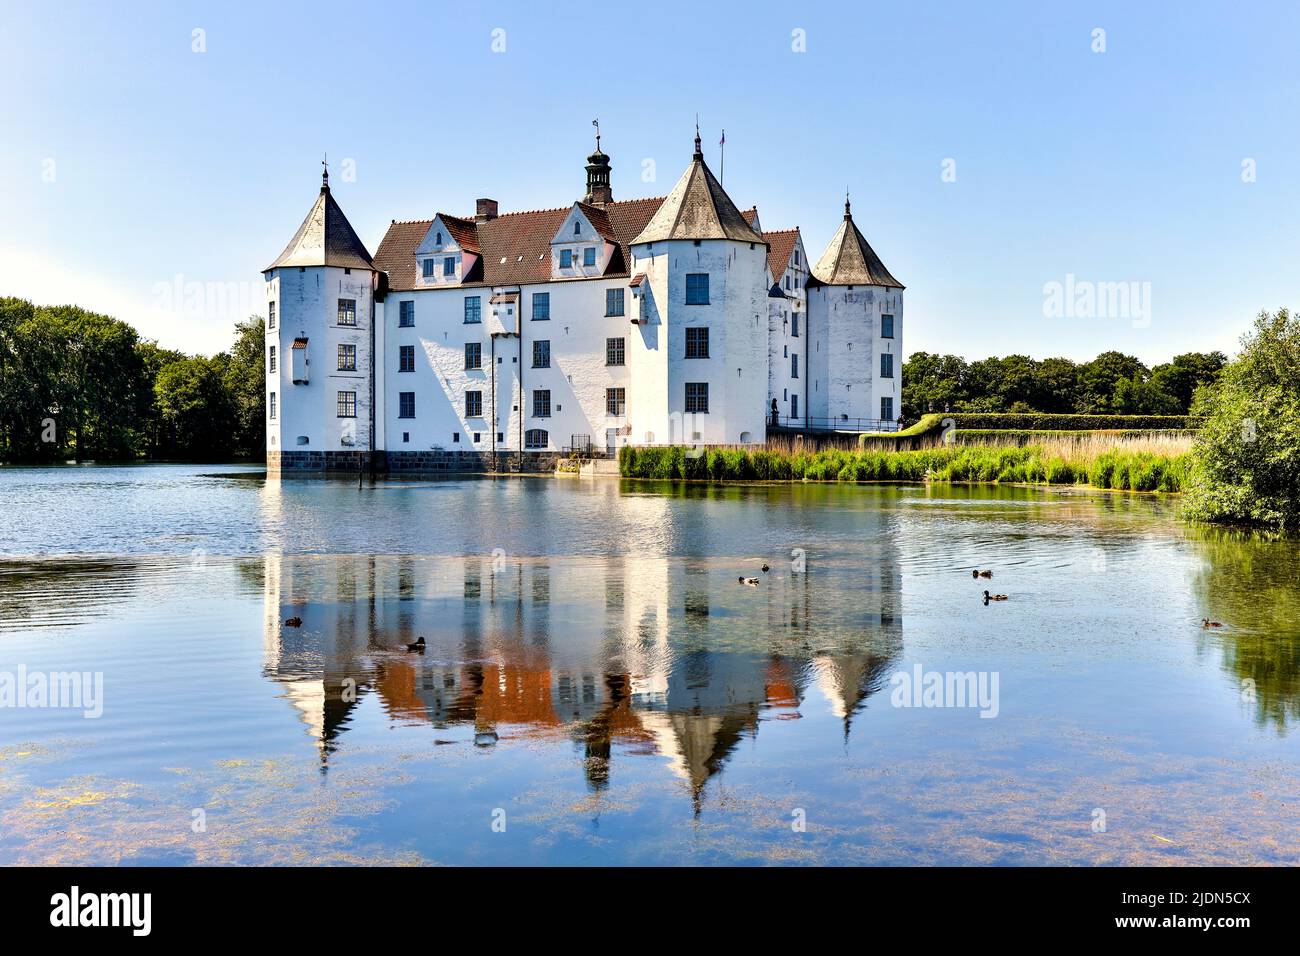 The aristocracy used to reside at Glücksburg Castle, today the guests have an impressive backdrop and an insight into art -historical treasures. Stock Photo